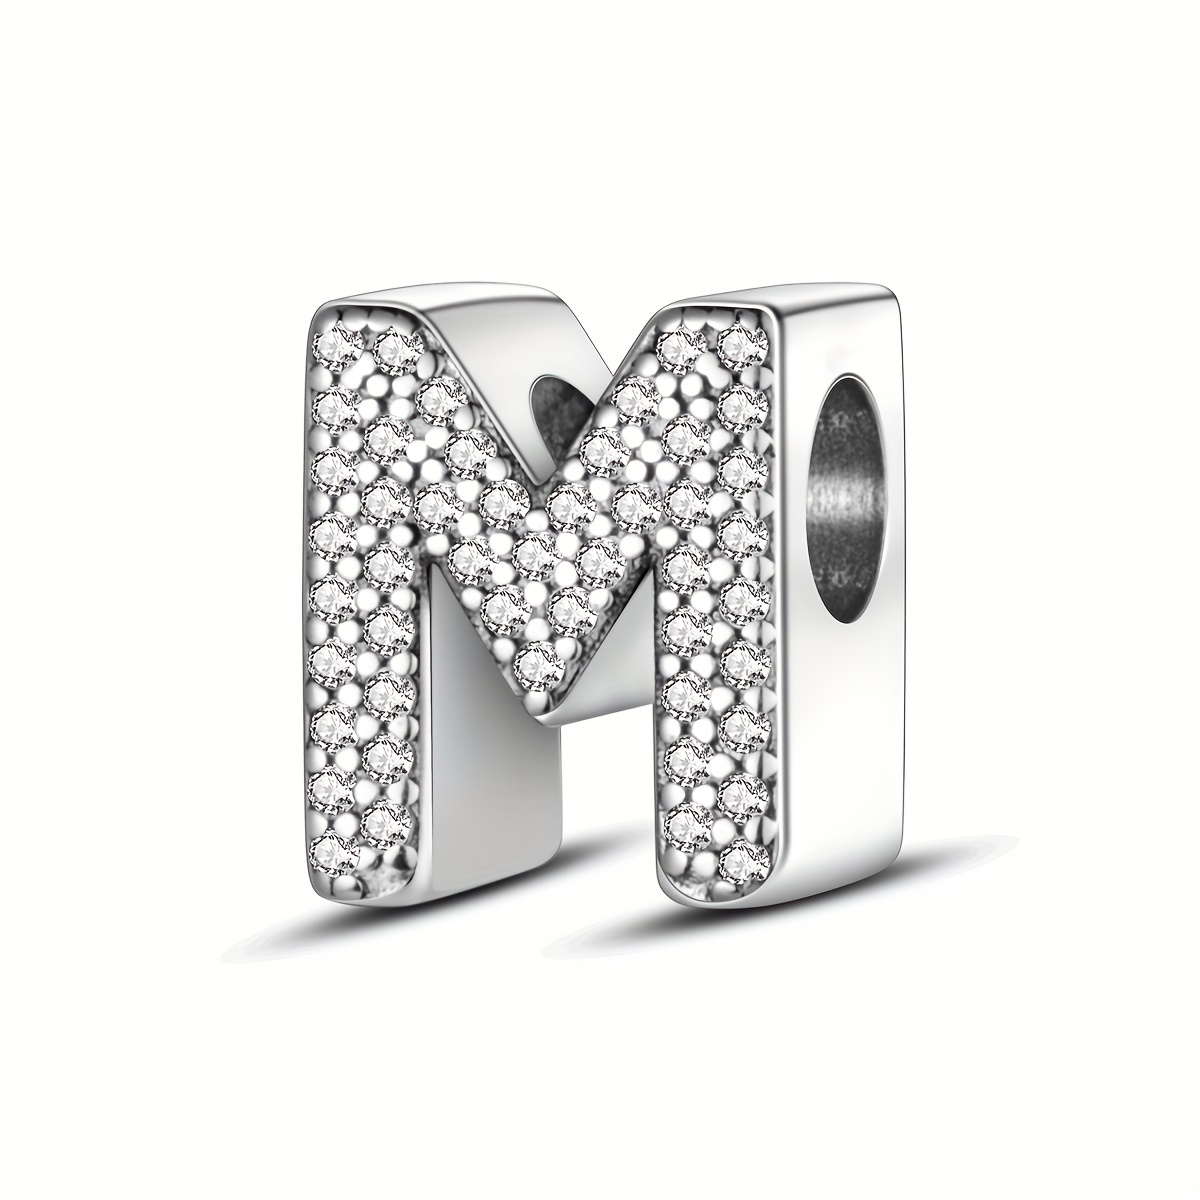 Charmalong™ Silver Plated Letter Charms by Bead Landing